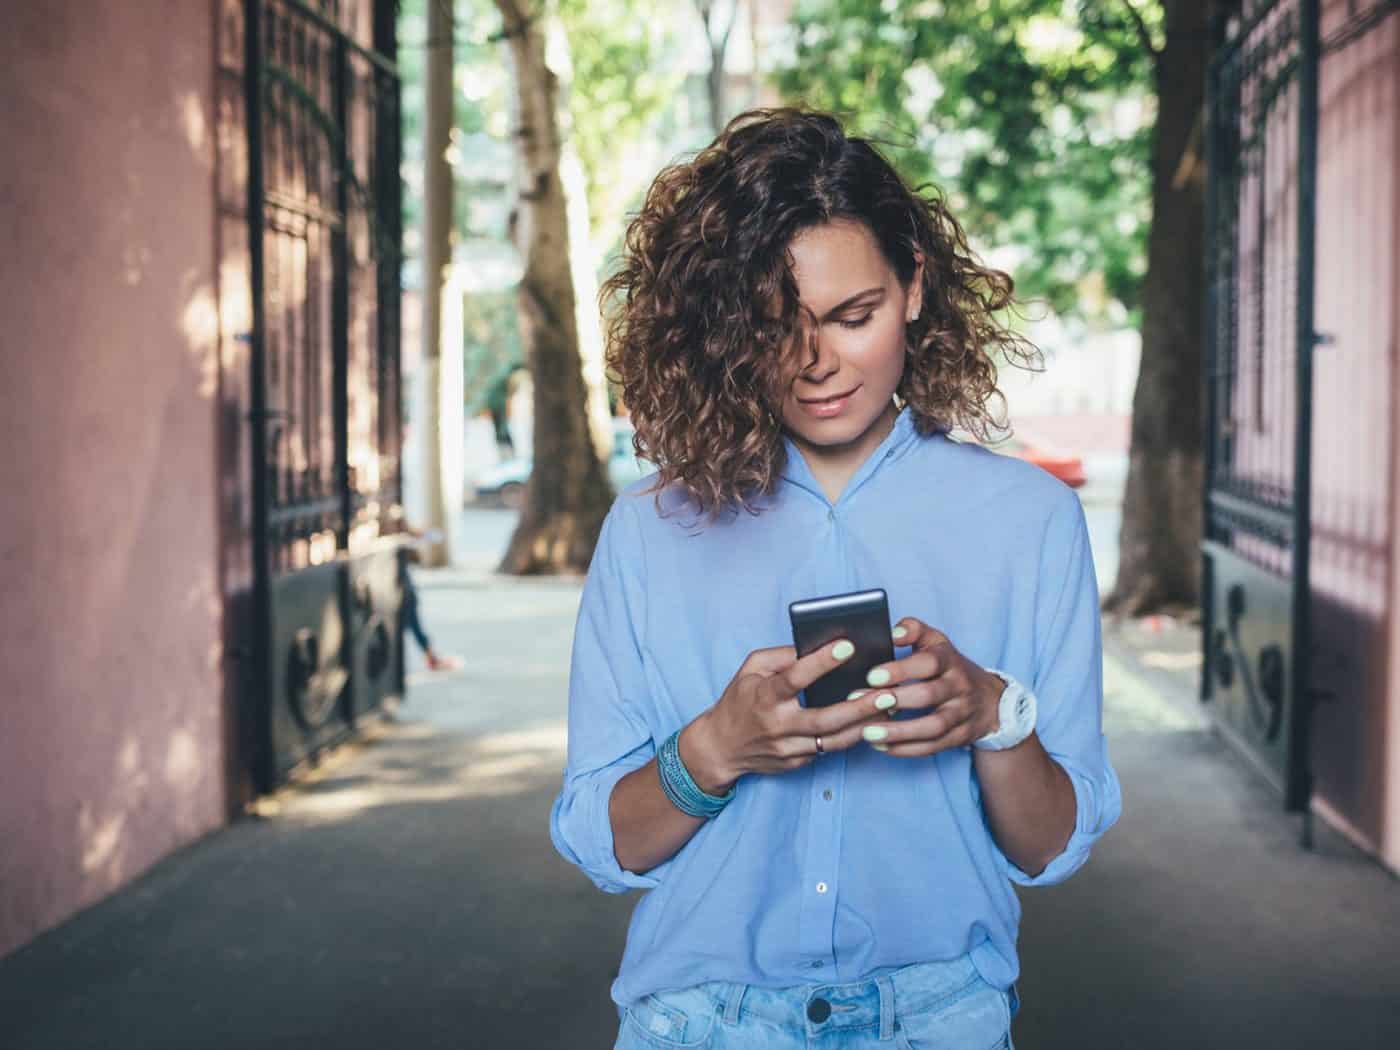 woman with curly hair looking at her phone